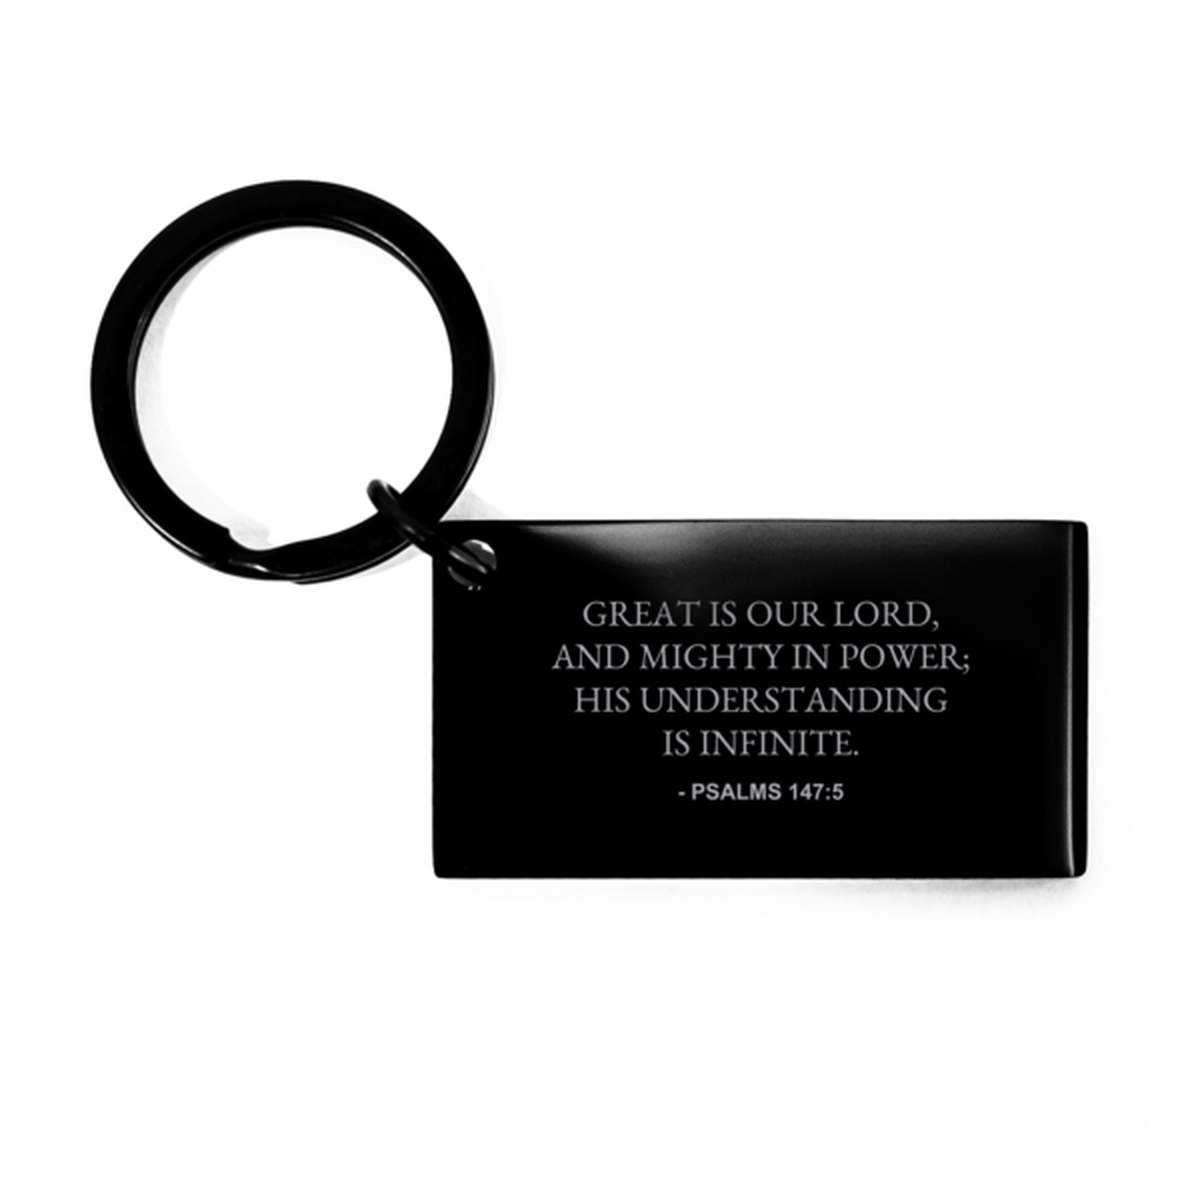 Bible Verse Black Keychain, Psalms 147:5 Great Is Our Lord, And Mighty In Power; His, Christian Inspirational Key Ring Gifts For Men Women